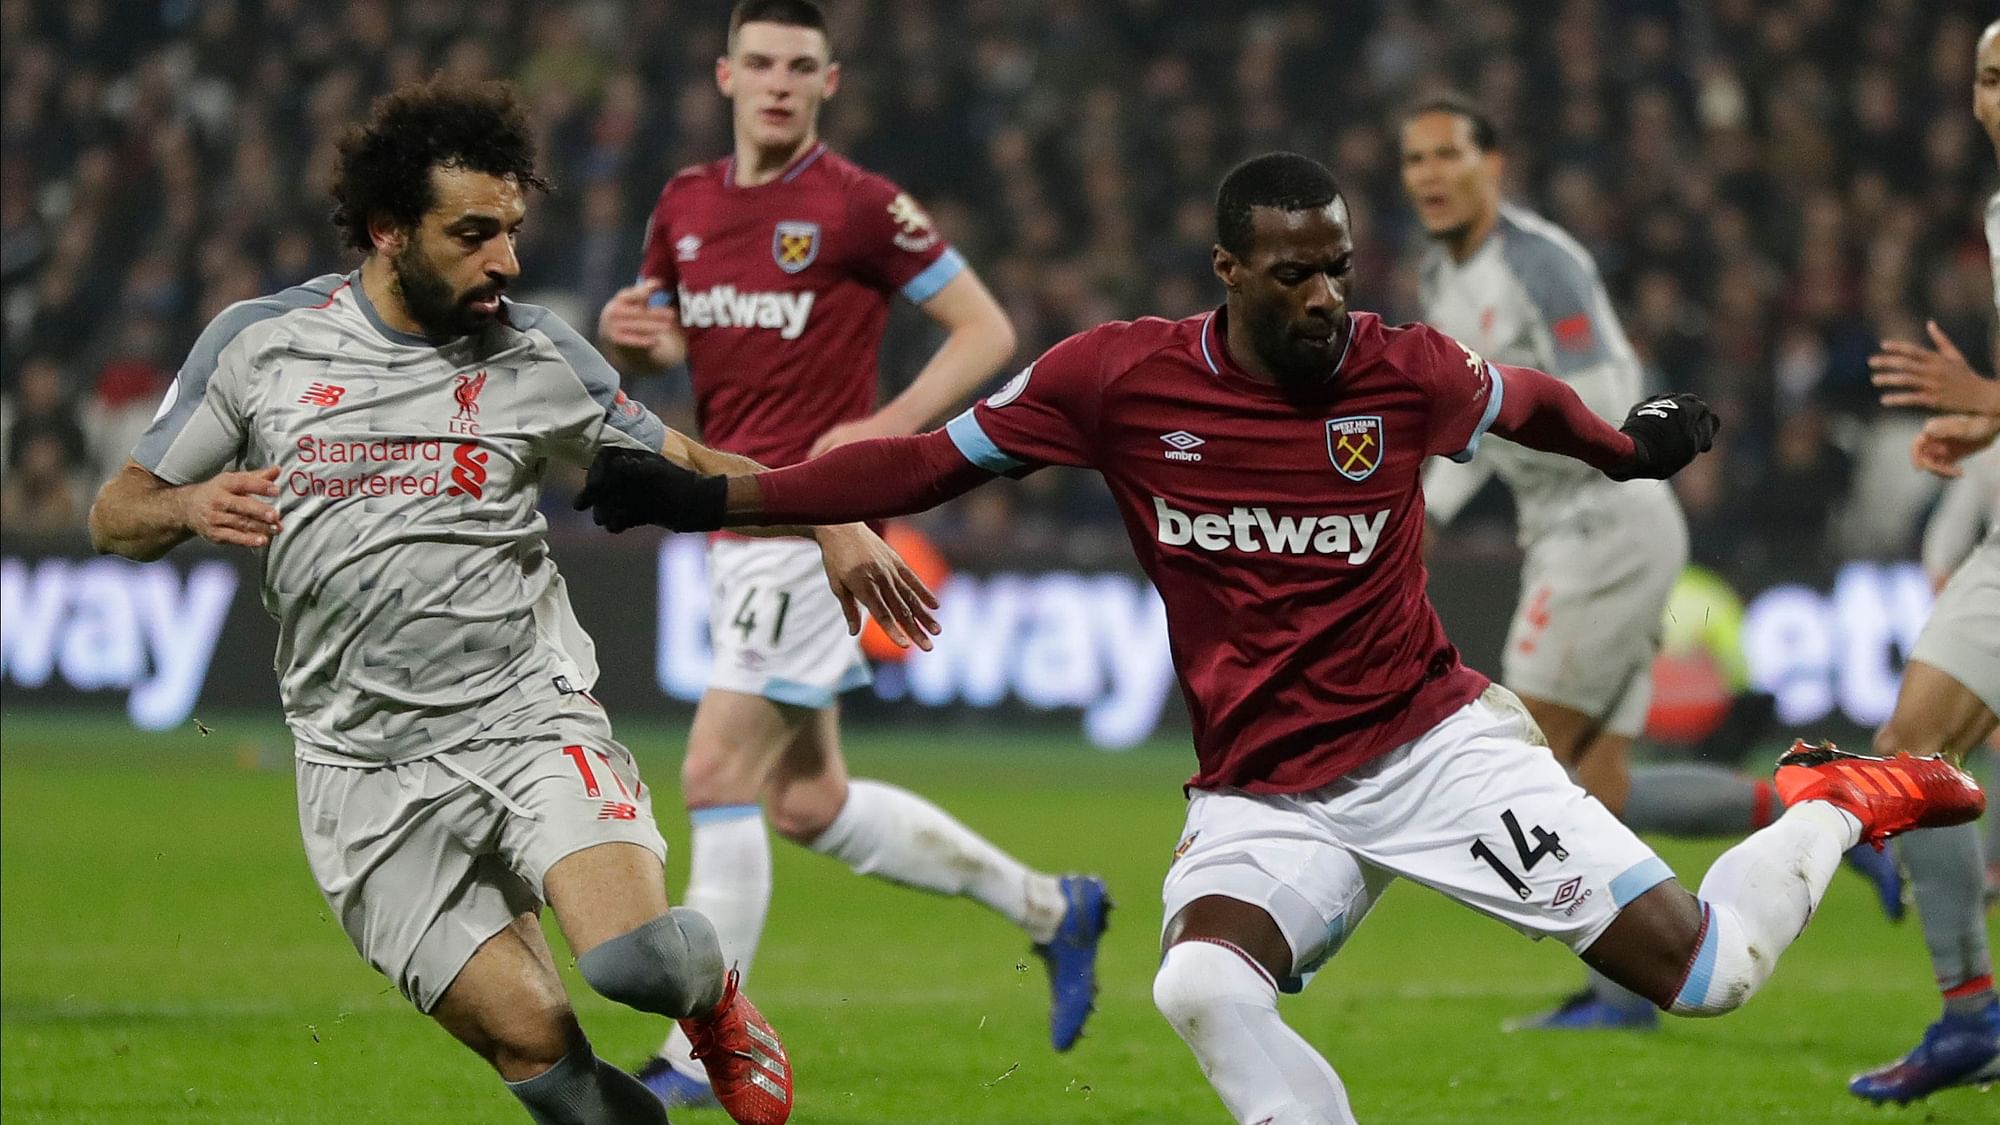 Liverpool’s Mohamed Salah, left, and West Ham’s Pedro Obiang challenge for the ball during the English Premier League soccer match.